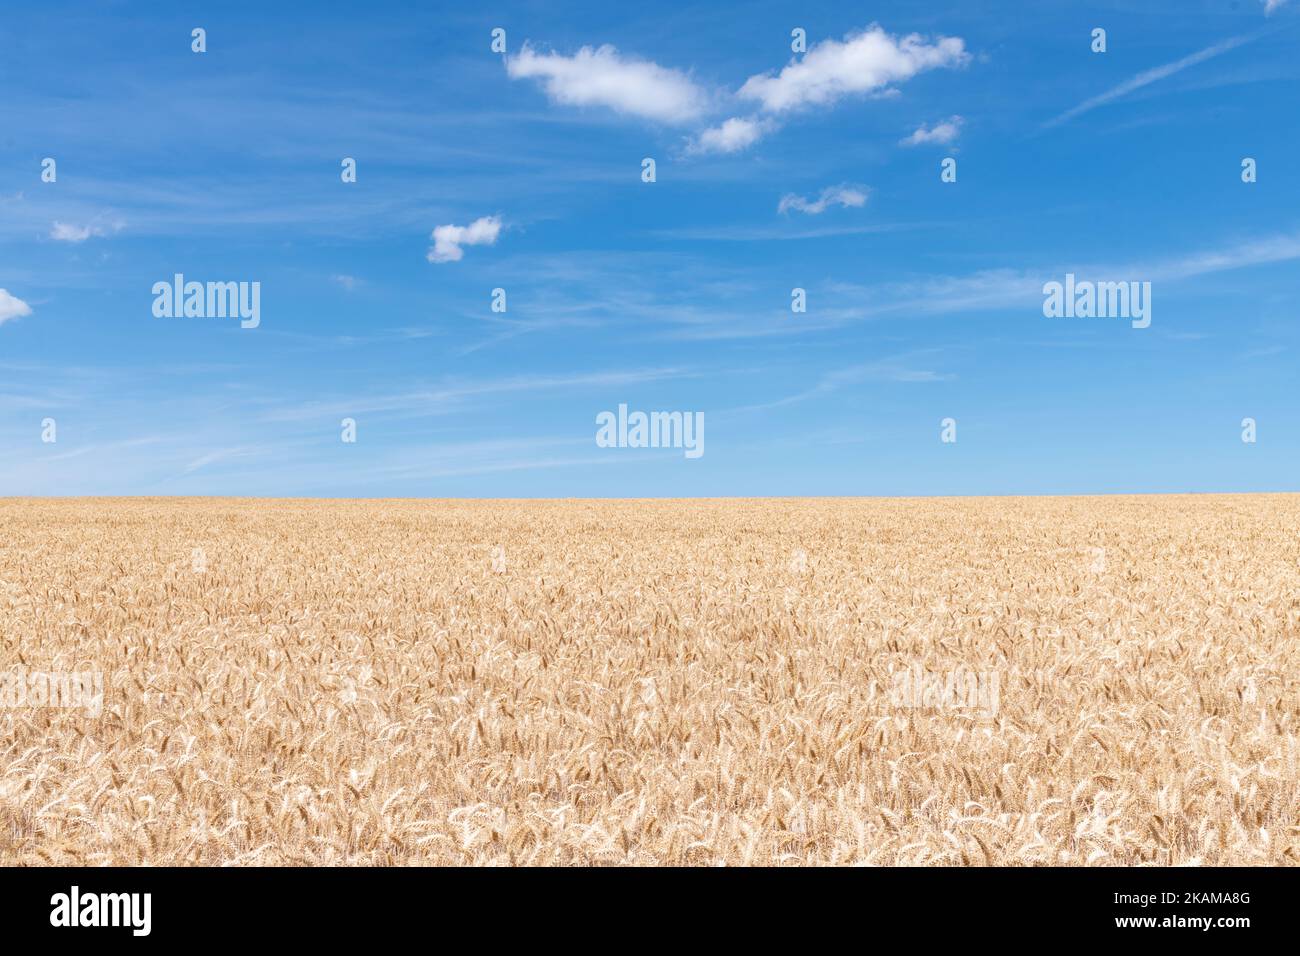 Field of awned or bearded wheat with blue sky - Kent, England, UK Stock Photo